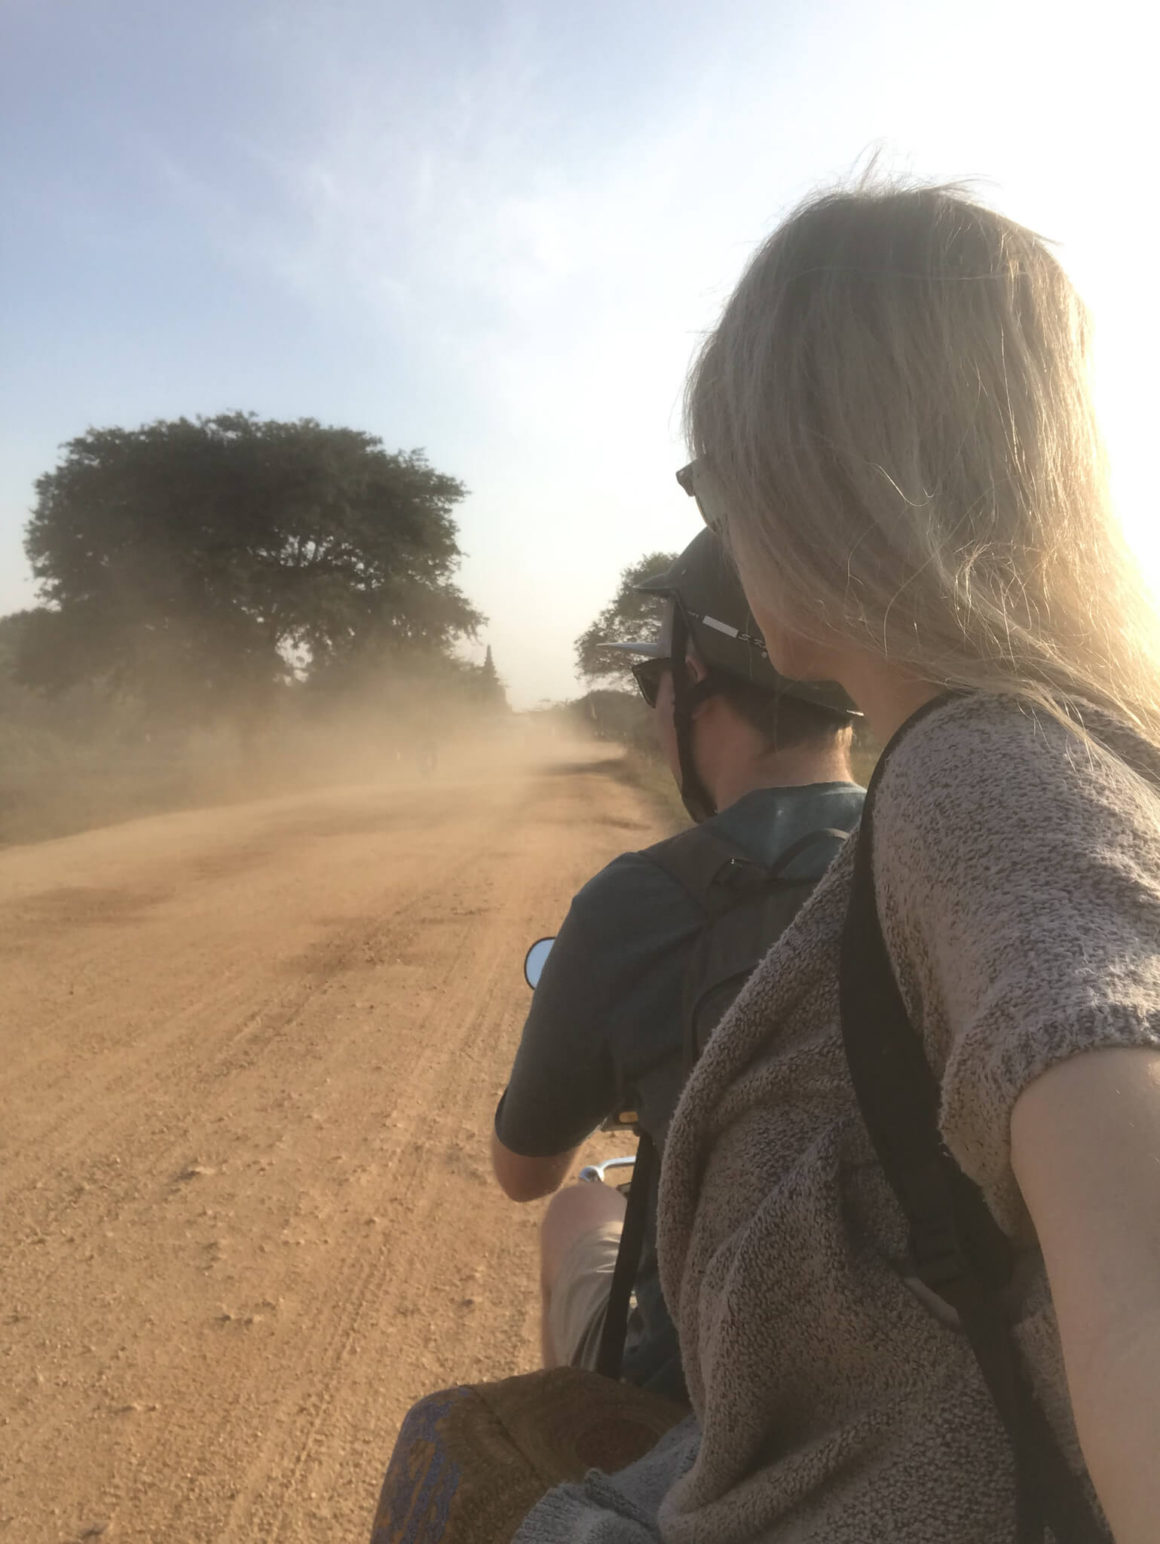 riding on the back of the e-bike in bagan, Myanmar down a dirt road